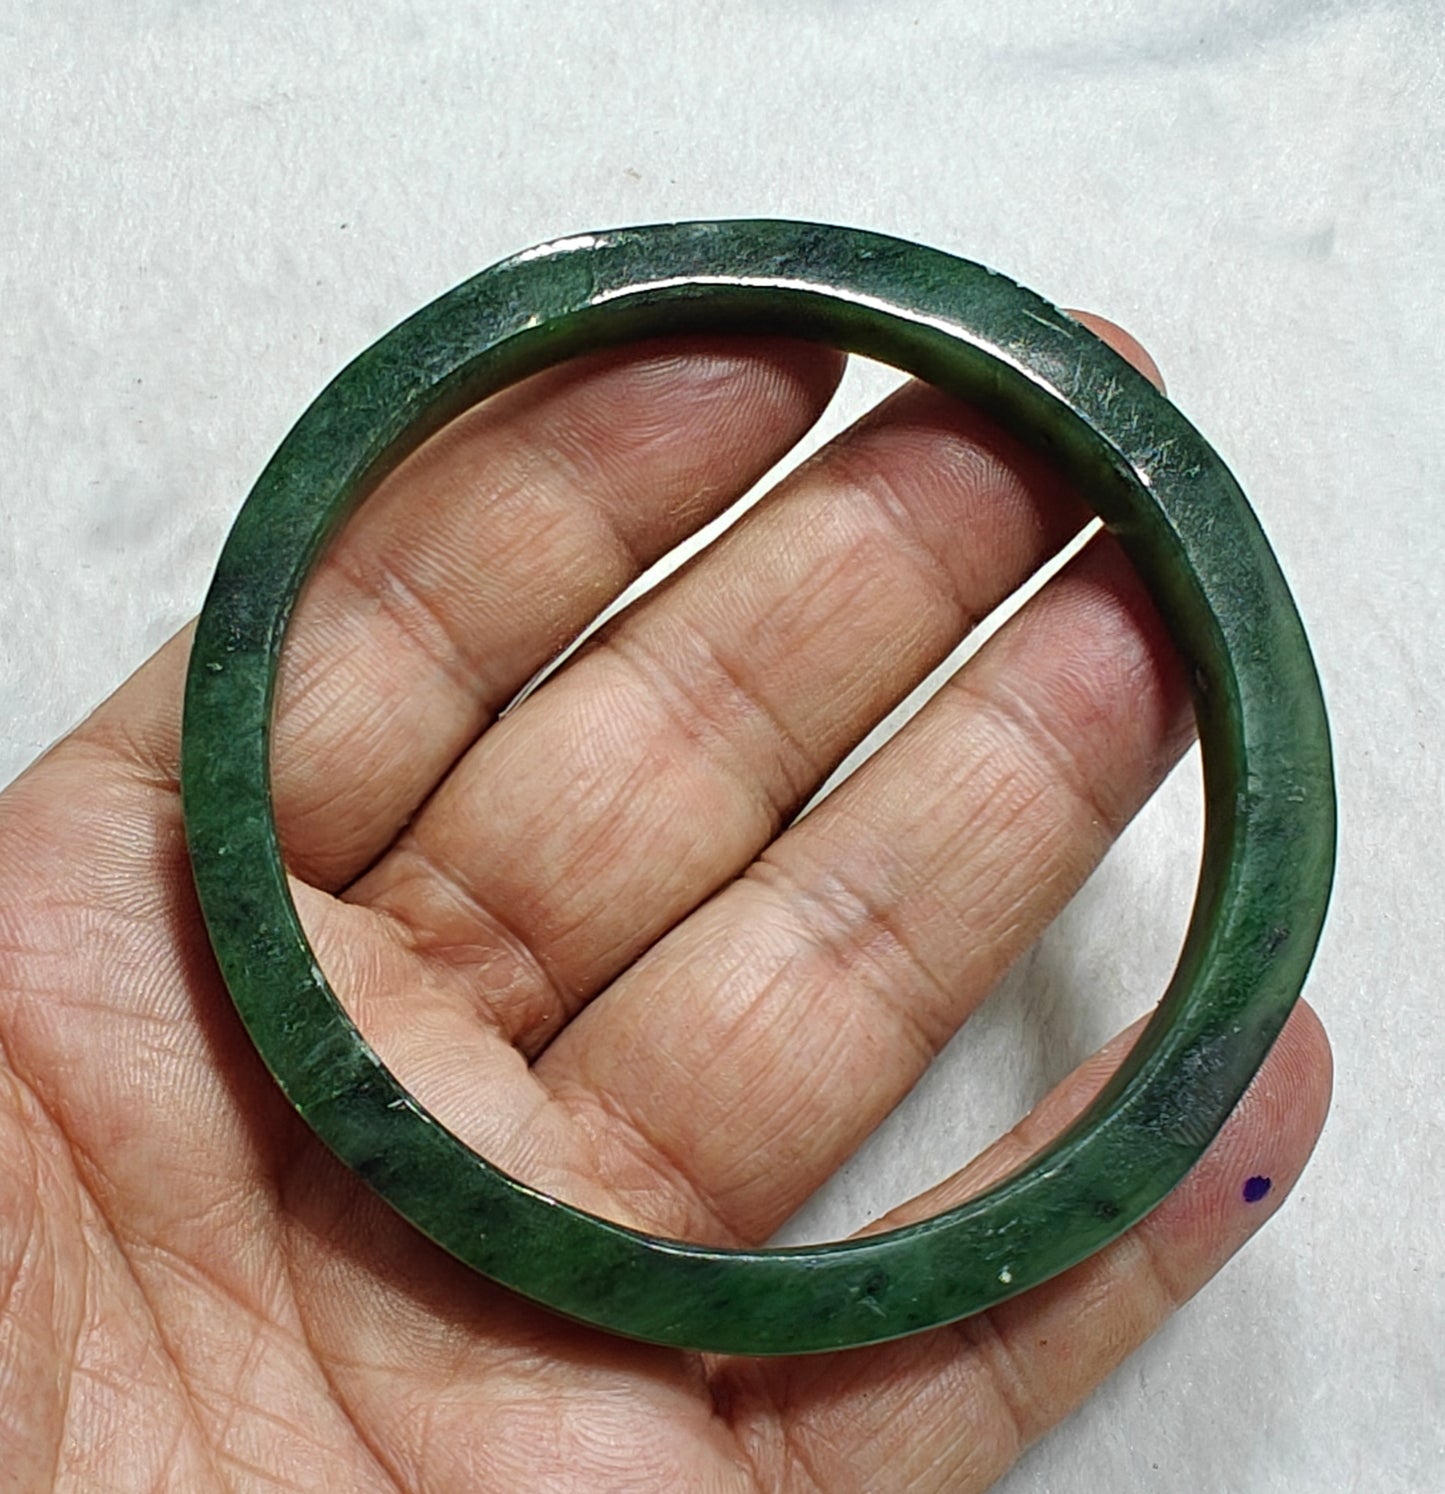 70 mm Size natural nephrite Bangle